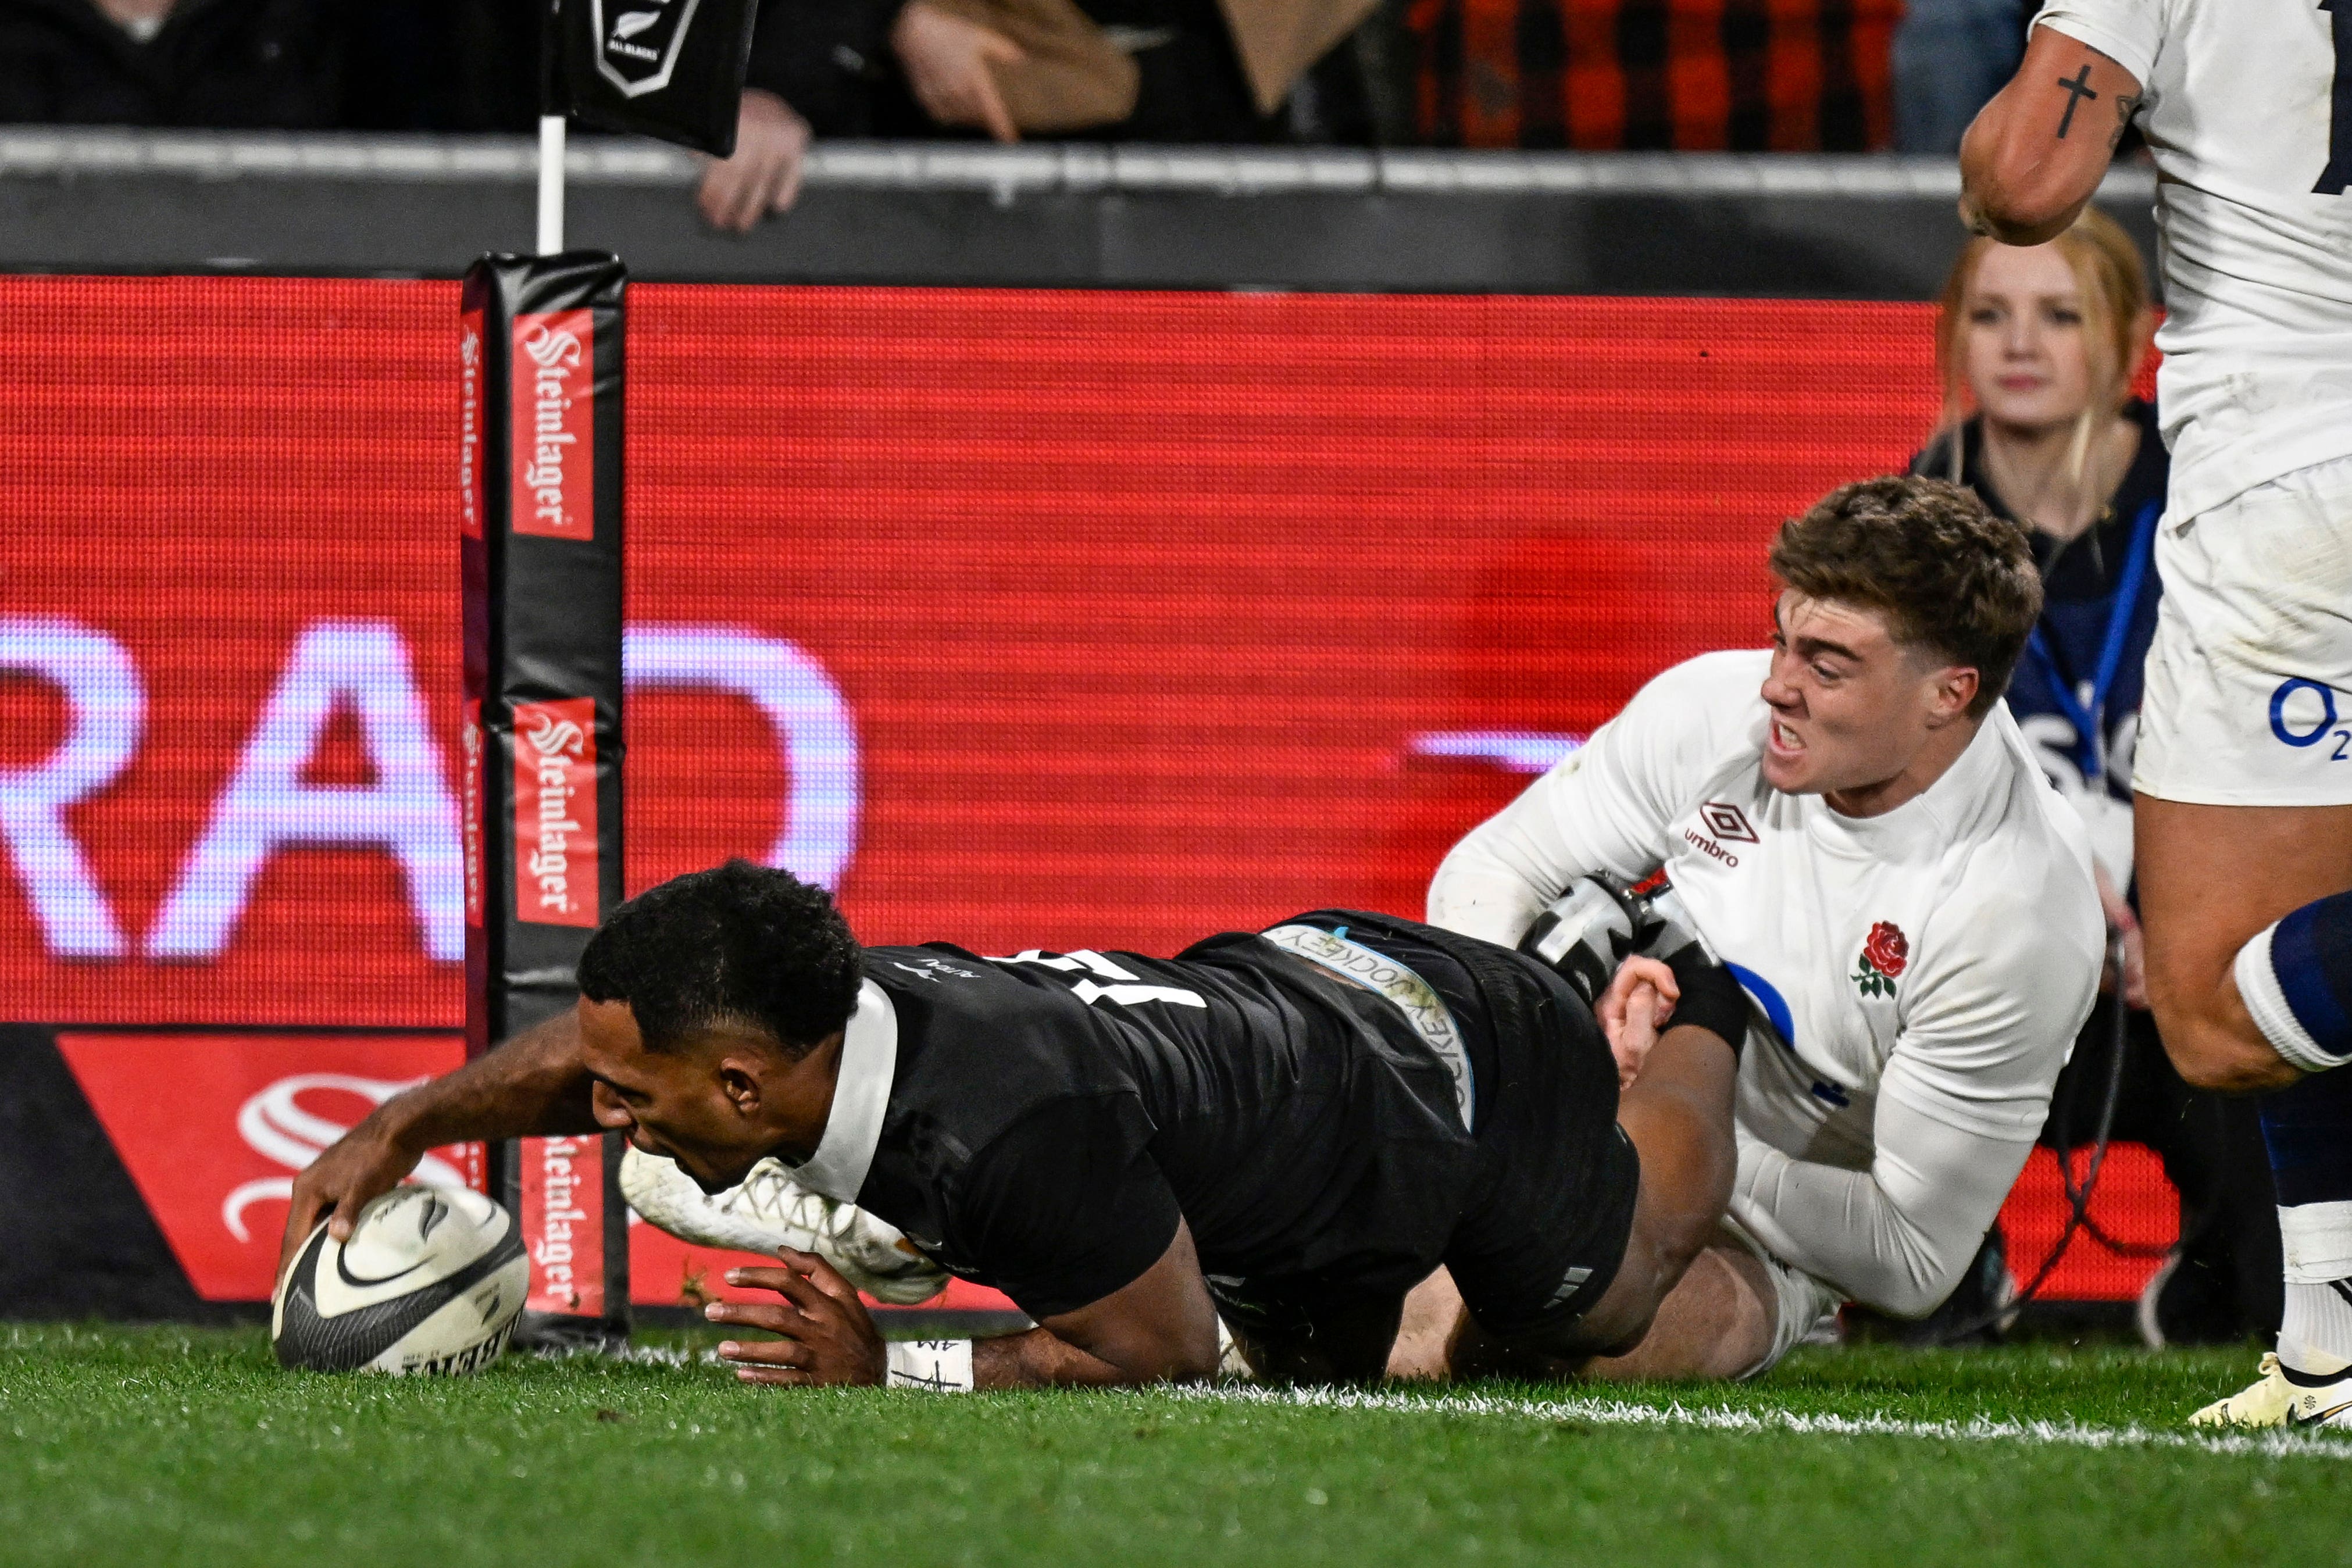 Sevu Reece’s try helped New Zealand to victory